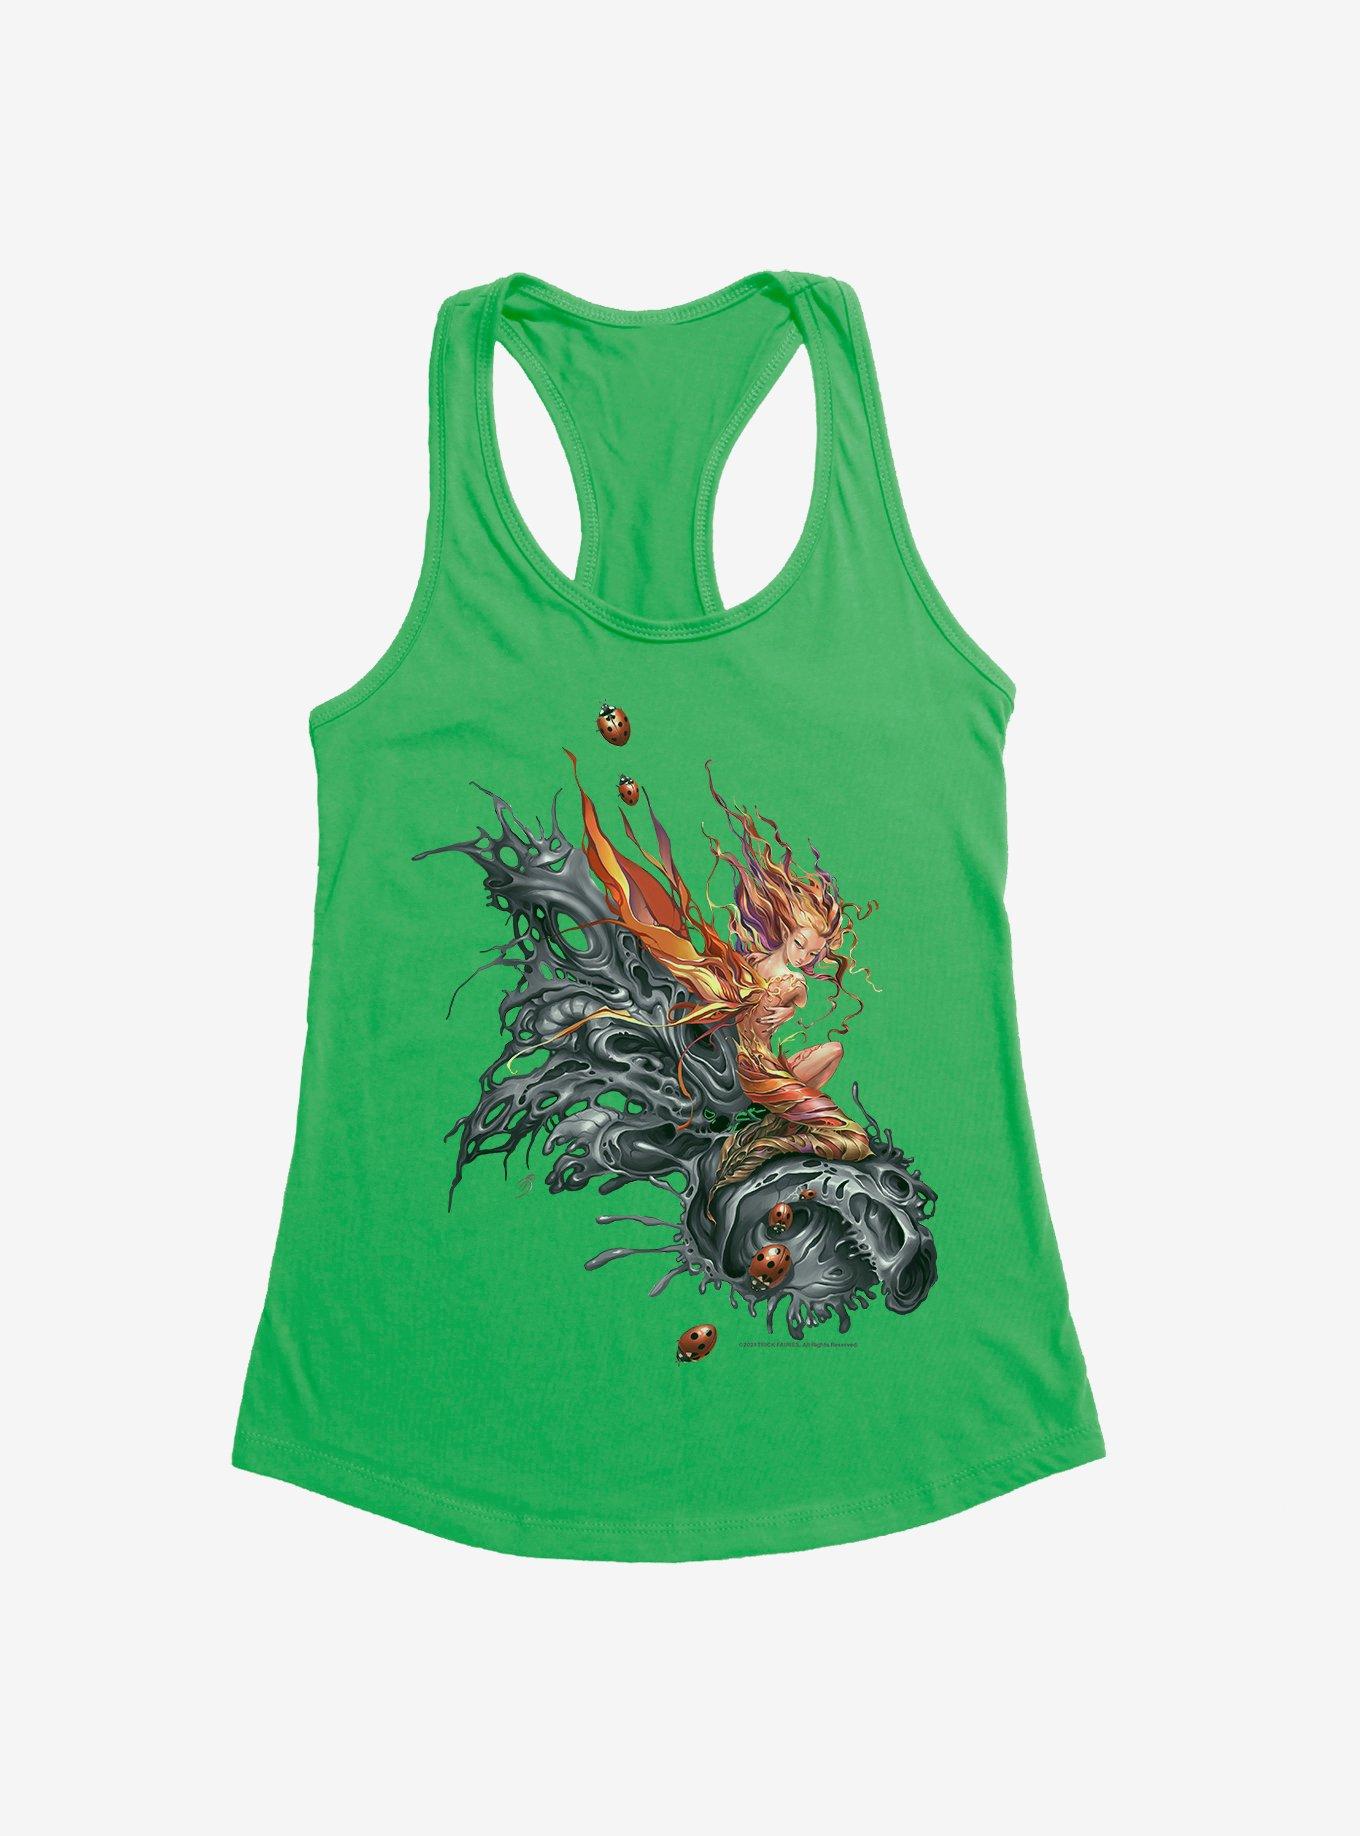 Fairies By Trick Lady Bug Fairy Girls Tank, , hi-res